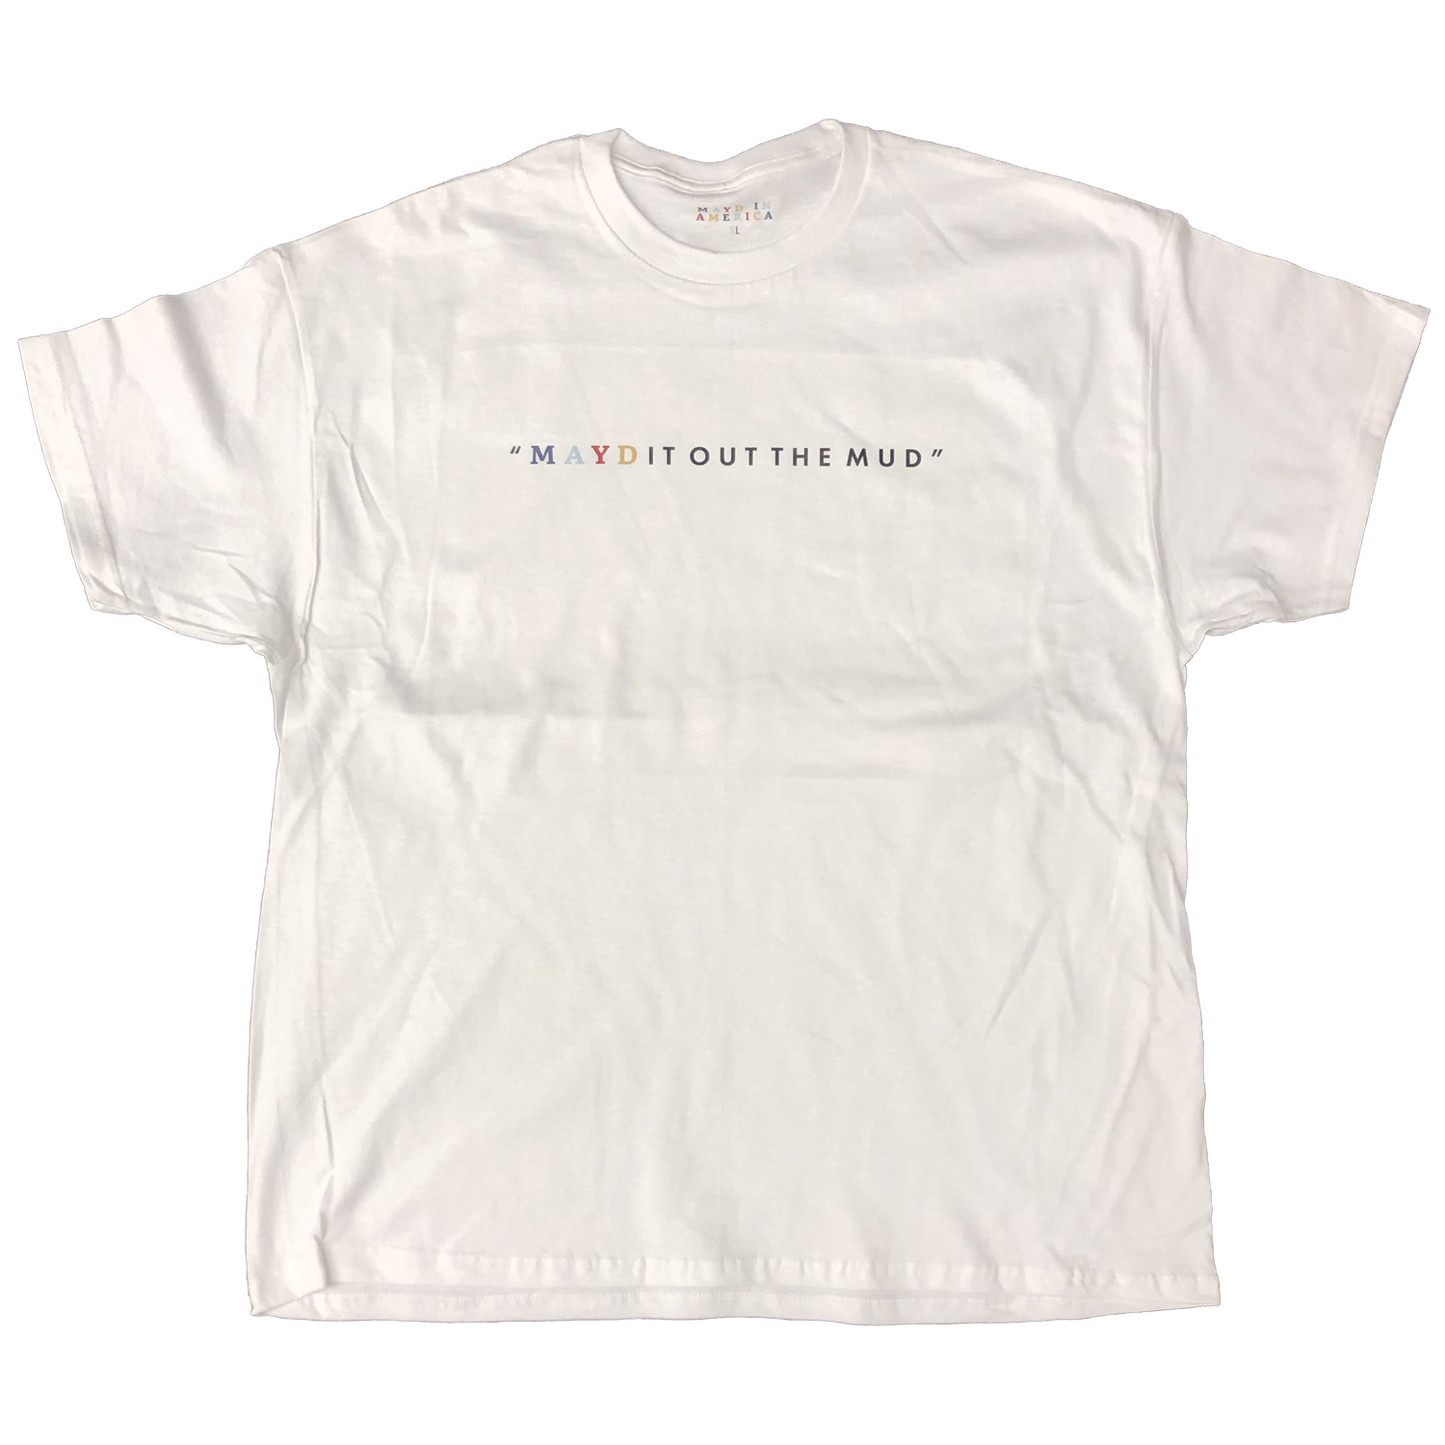 MAYD in America "Mayd it out the mud" T-shirt